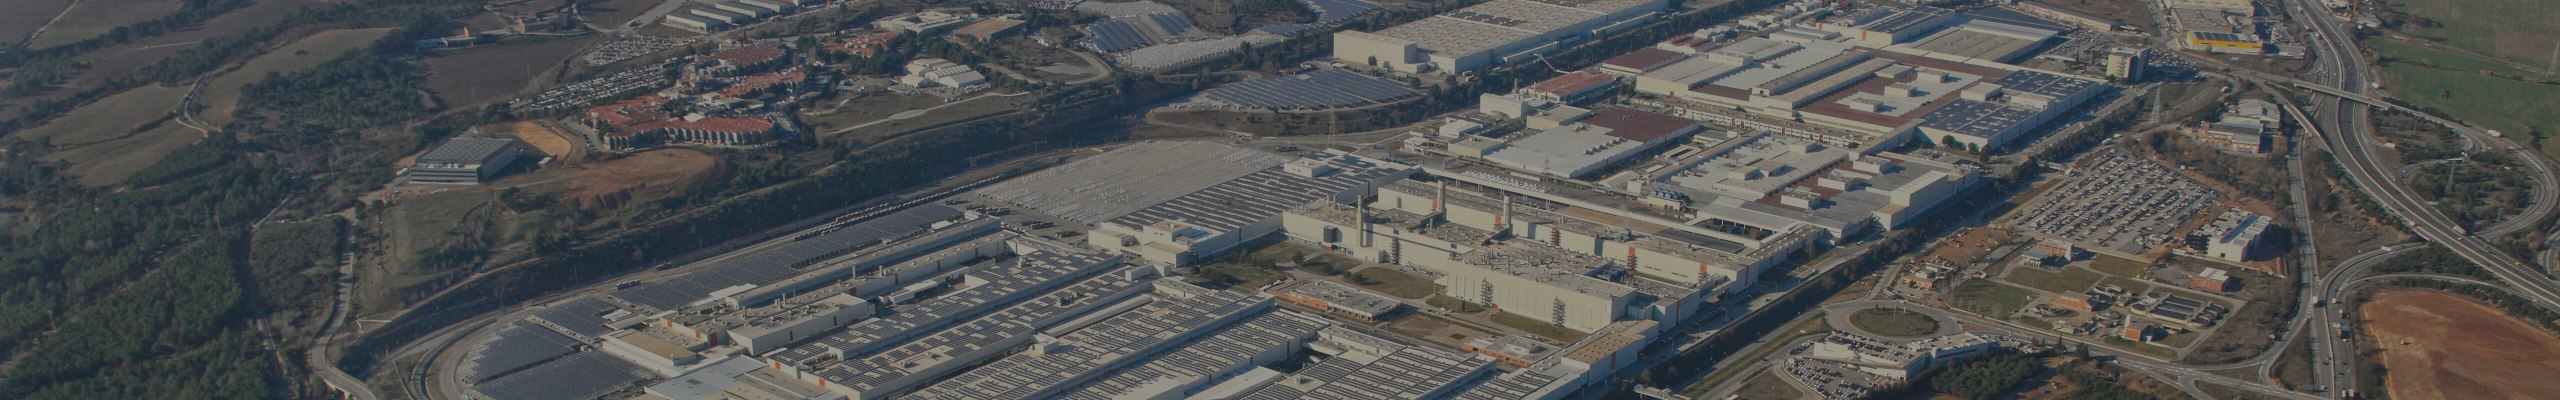 Aerial view of the SEAT factory